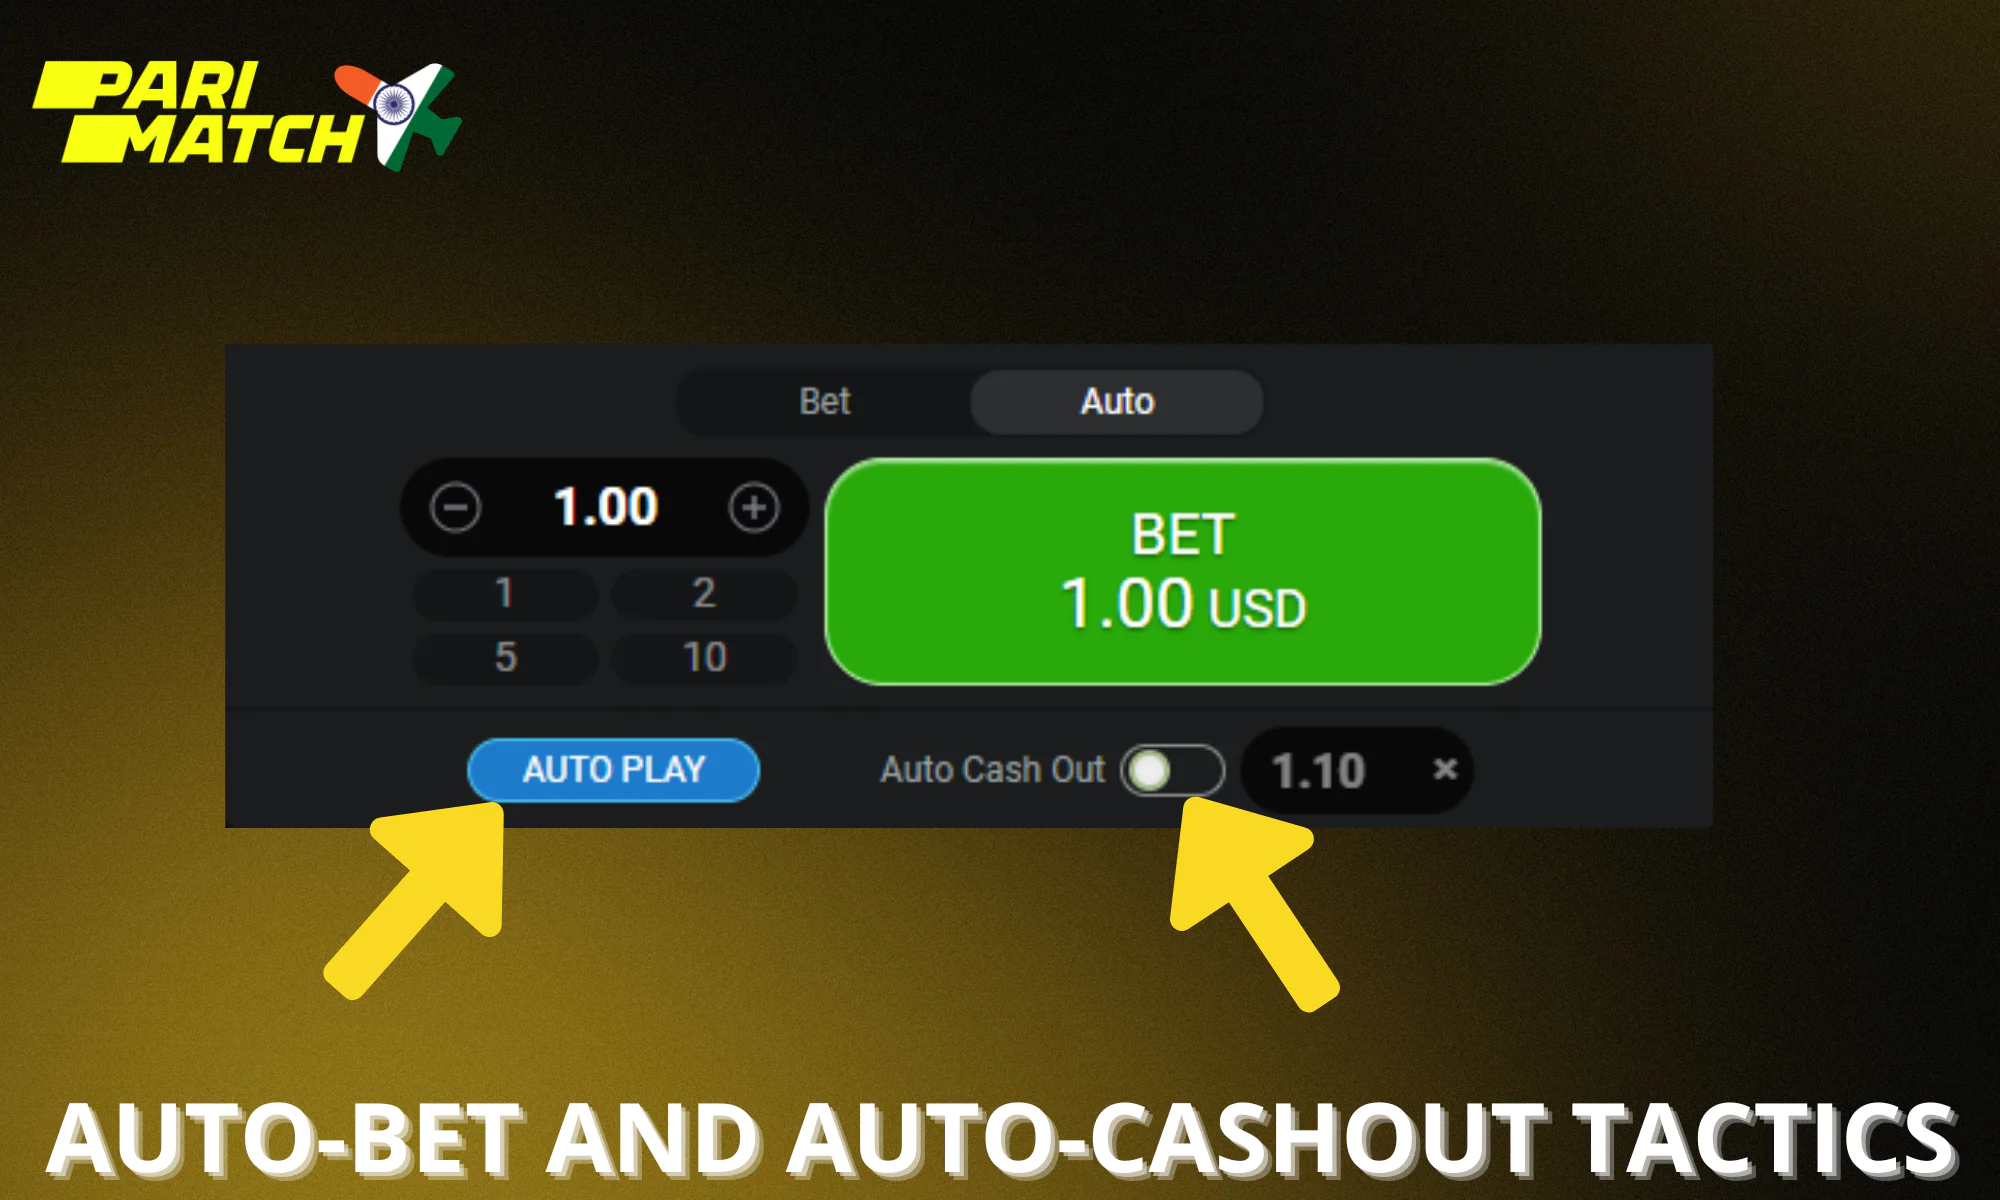 Automatic betting and automatic withdrawal tactics are available in Parimatch Aviator